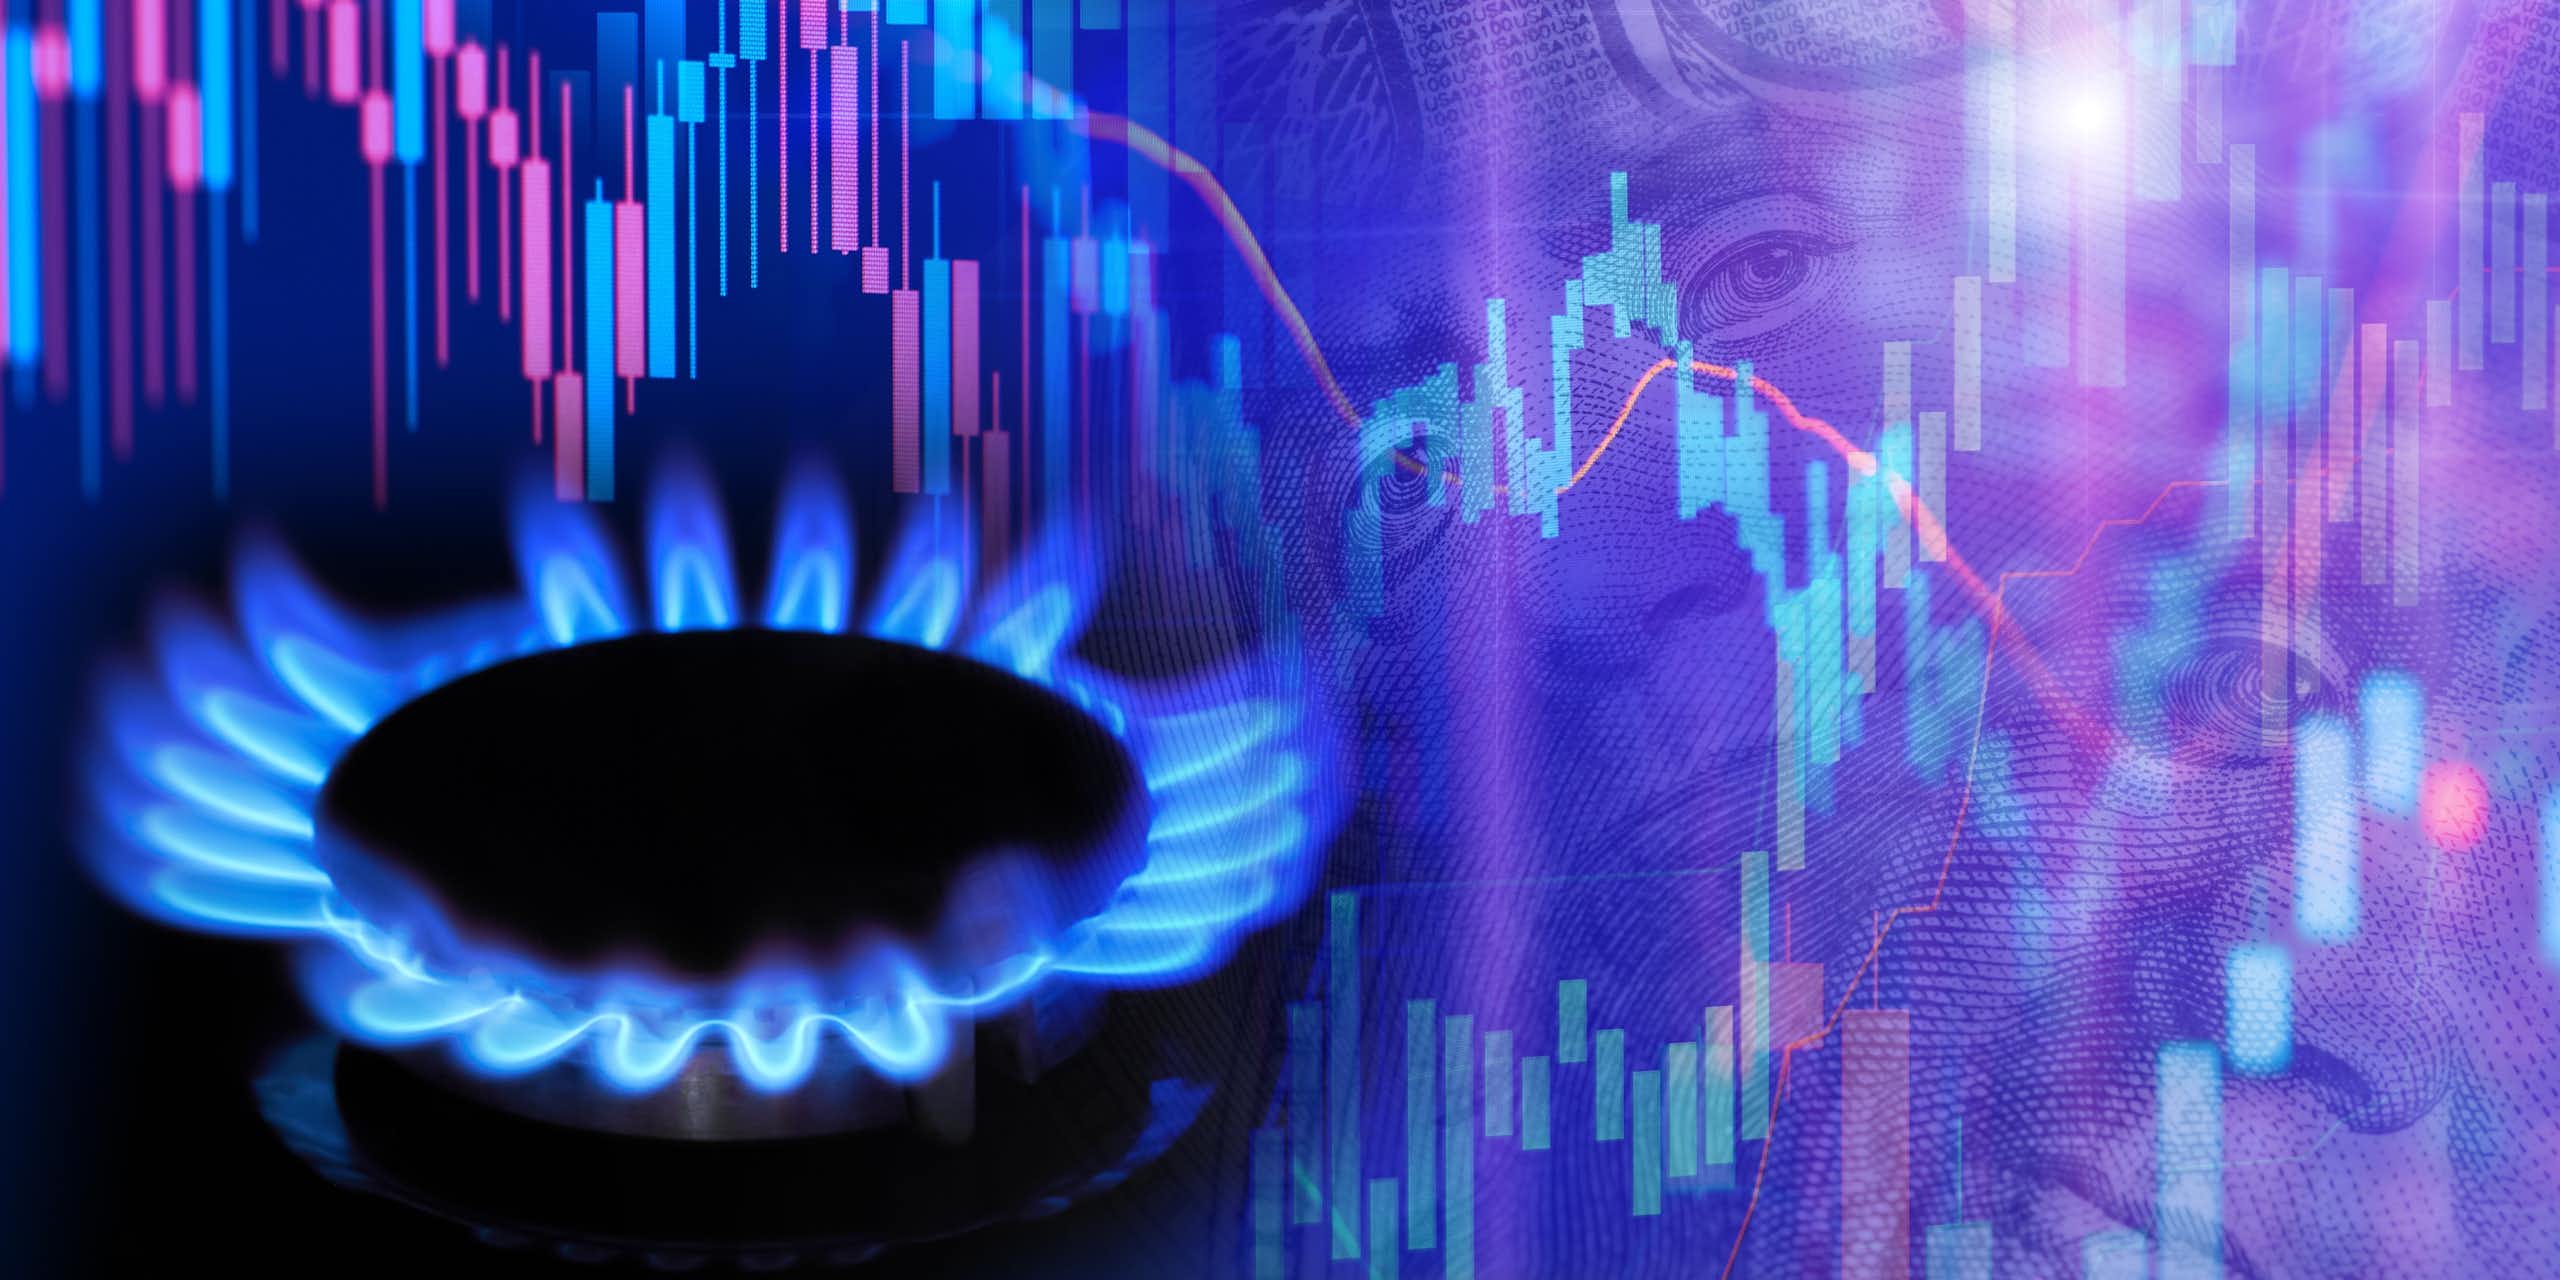 blue gas ring flames lit, background with computer generated pink and blue stock chart graph to indicate rising costs